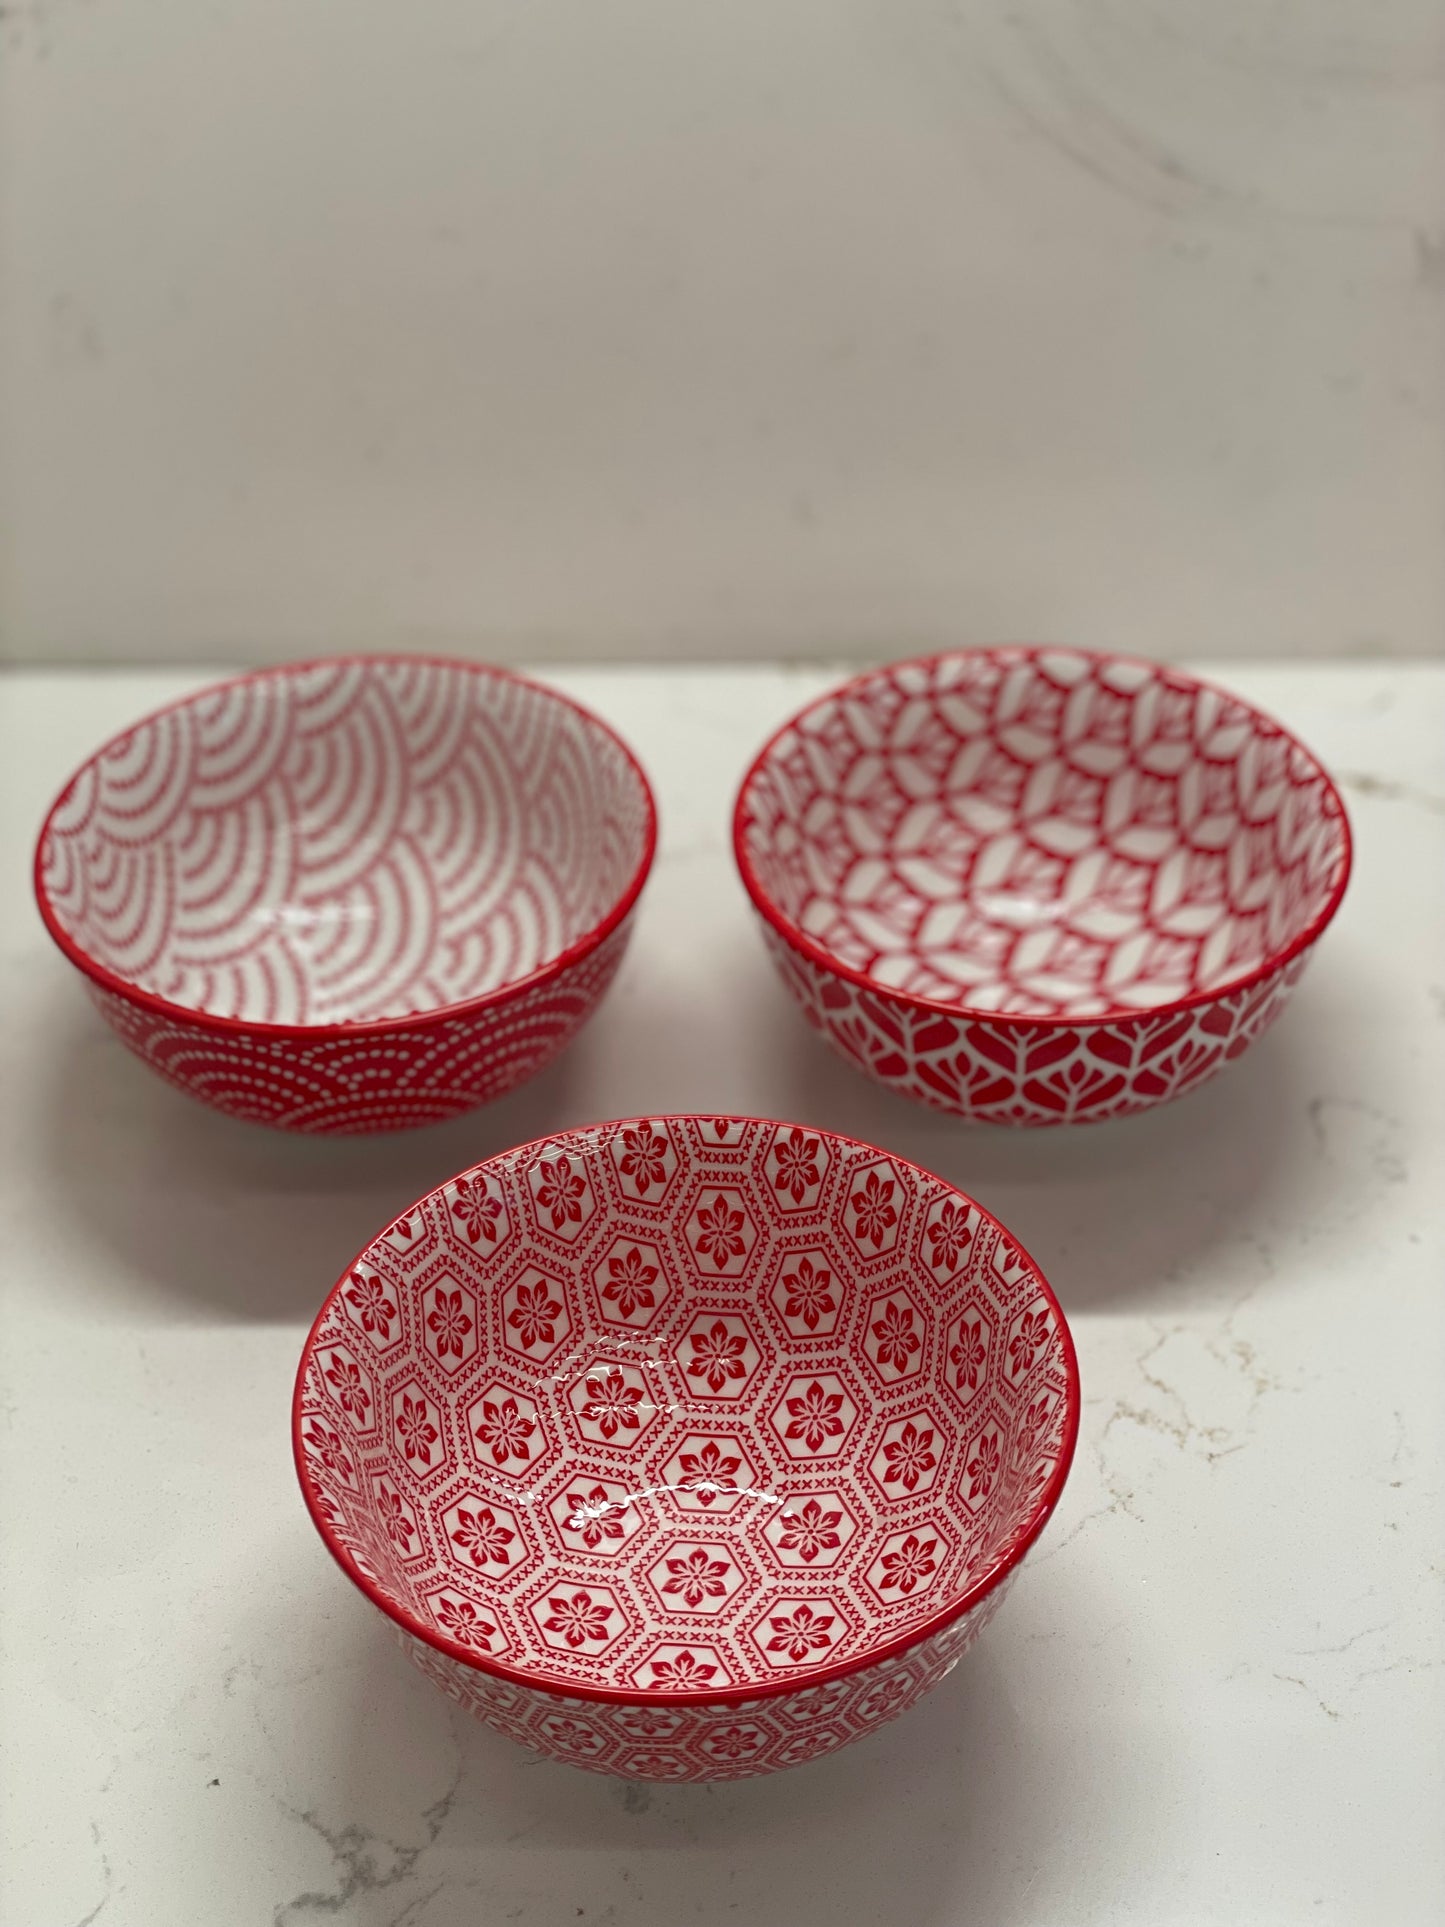 Red and White Bowls